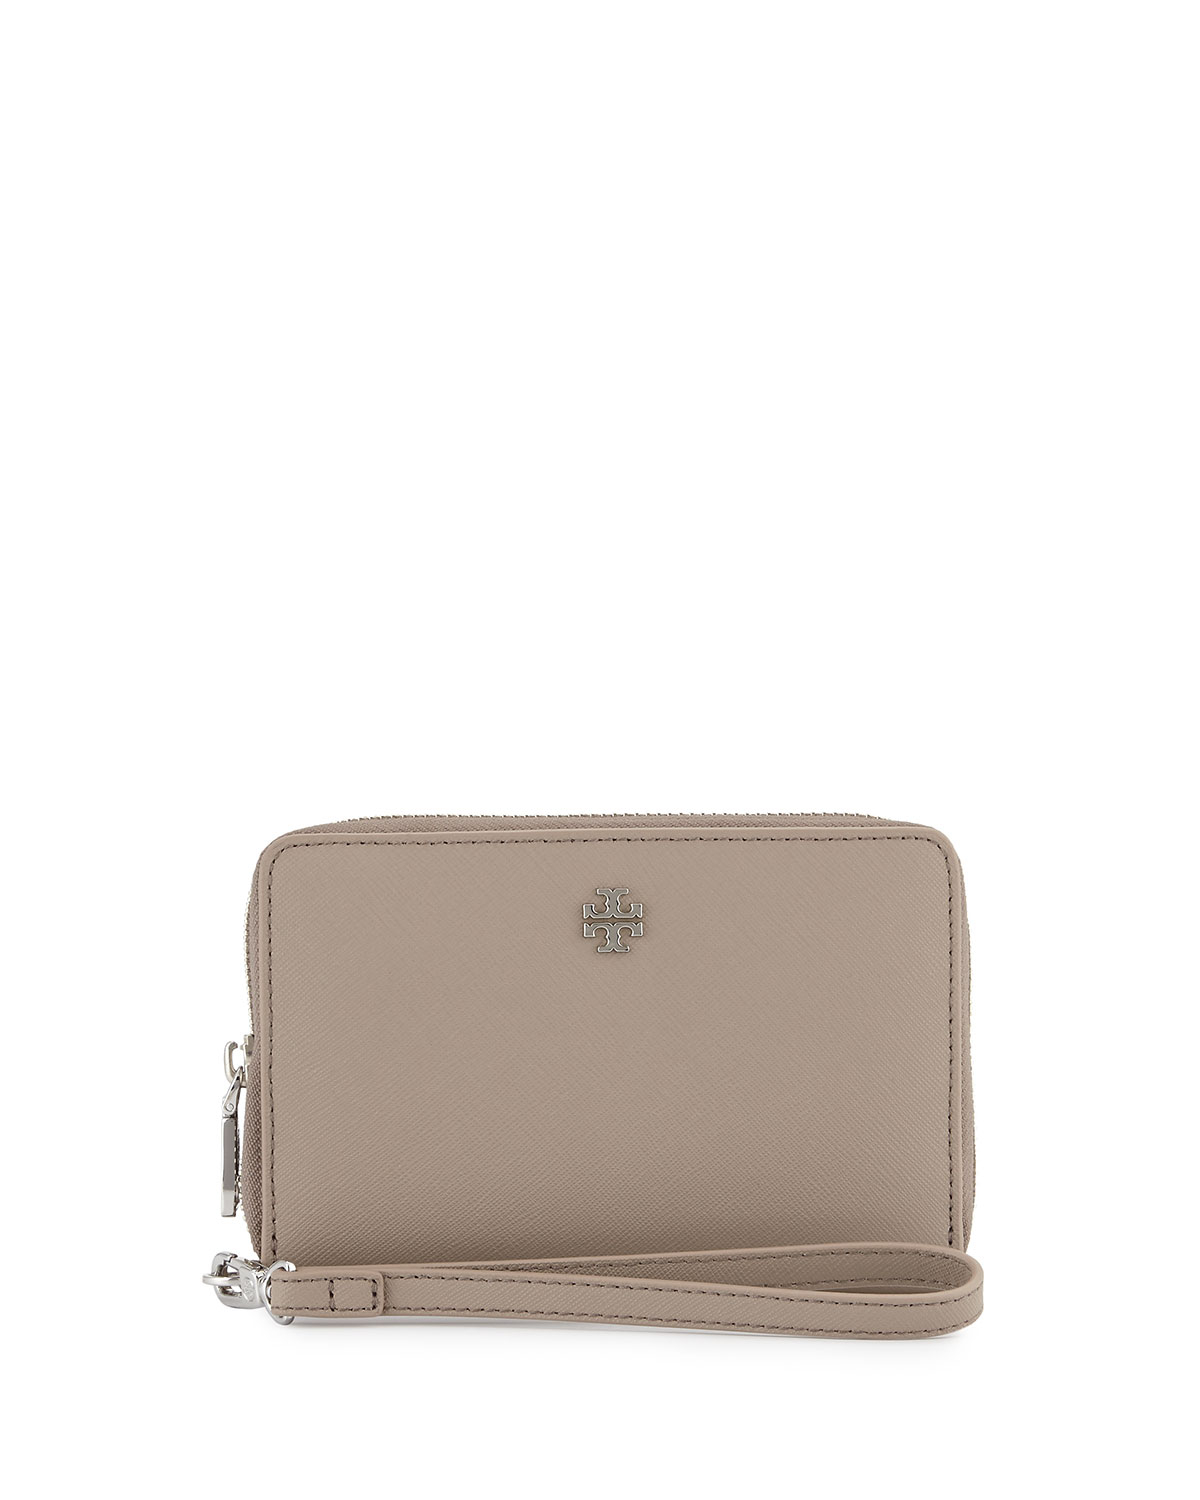 Tory burch York Smartphone Wristlet Wallet in Gray (FRENCH GREY) | Lyst